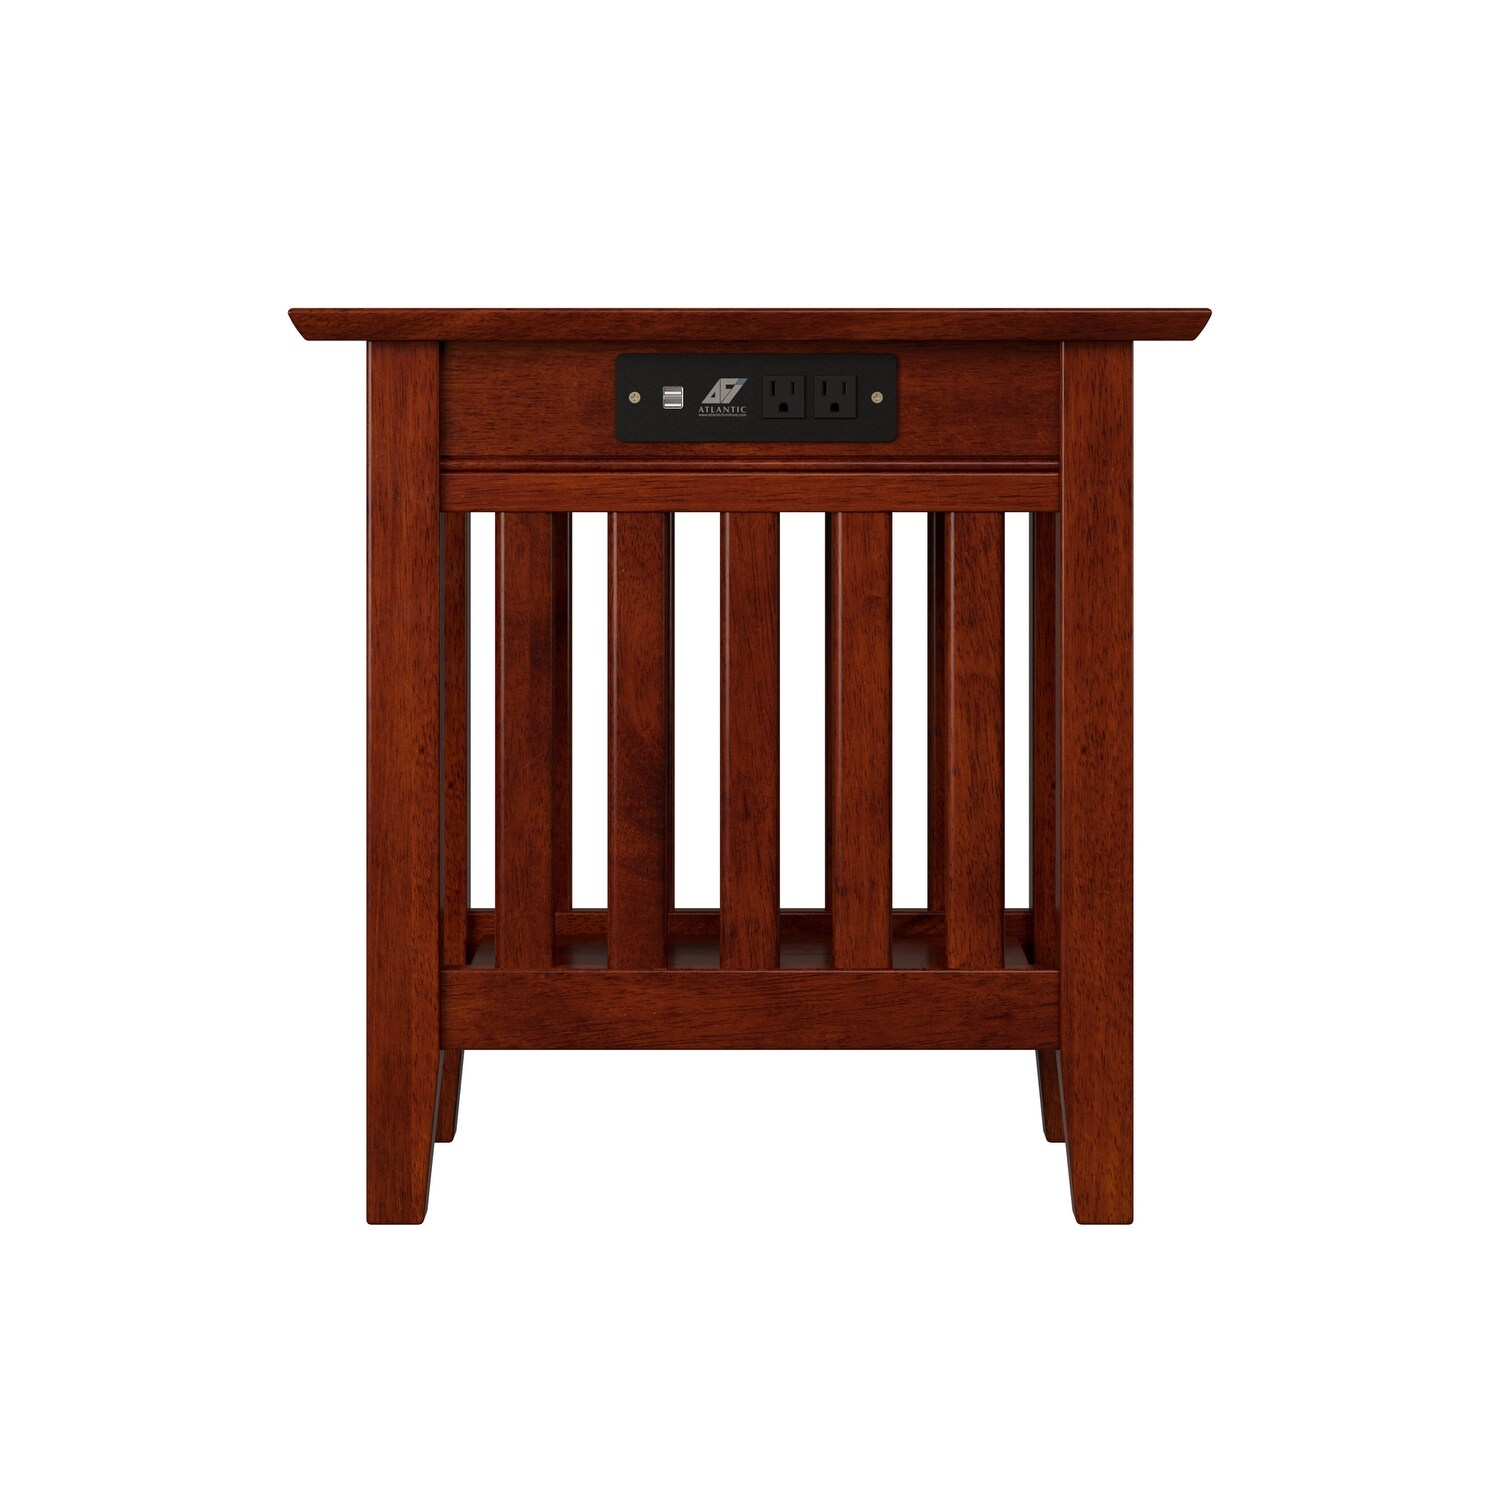 End Table with Charging Station in Walnut Brown Nautical Coastal Square Wood Finish Includes Hardware 